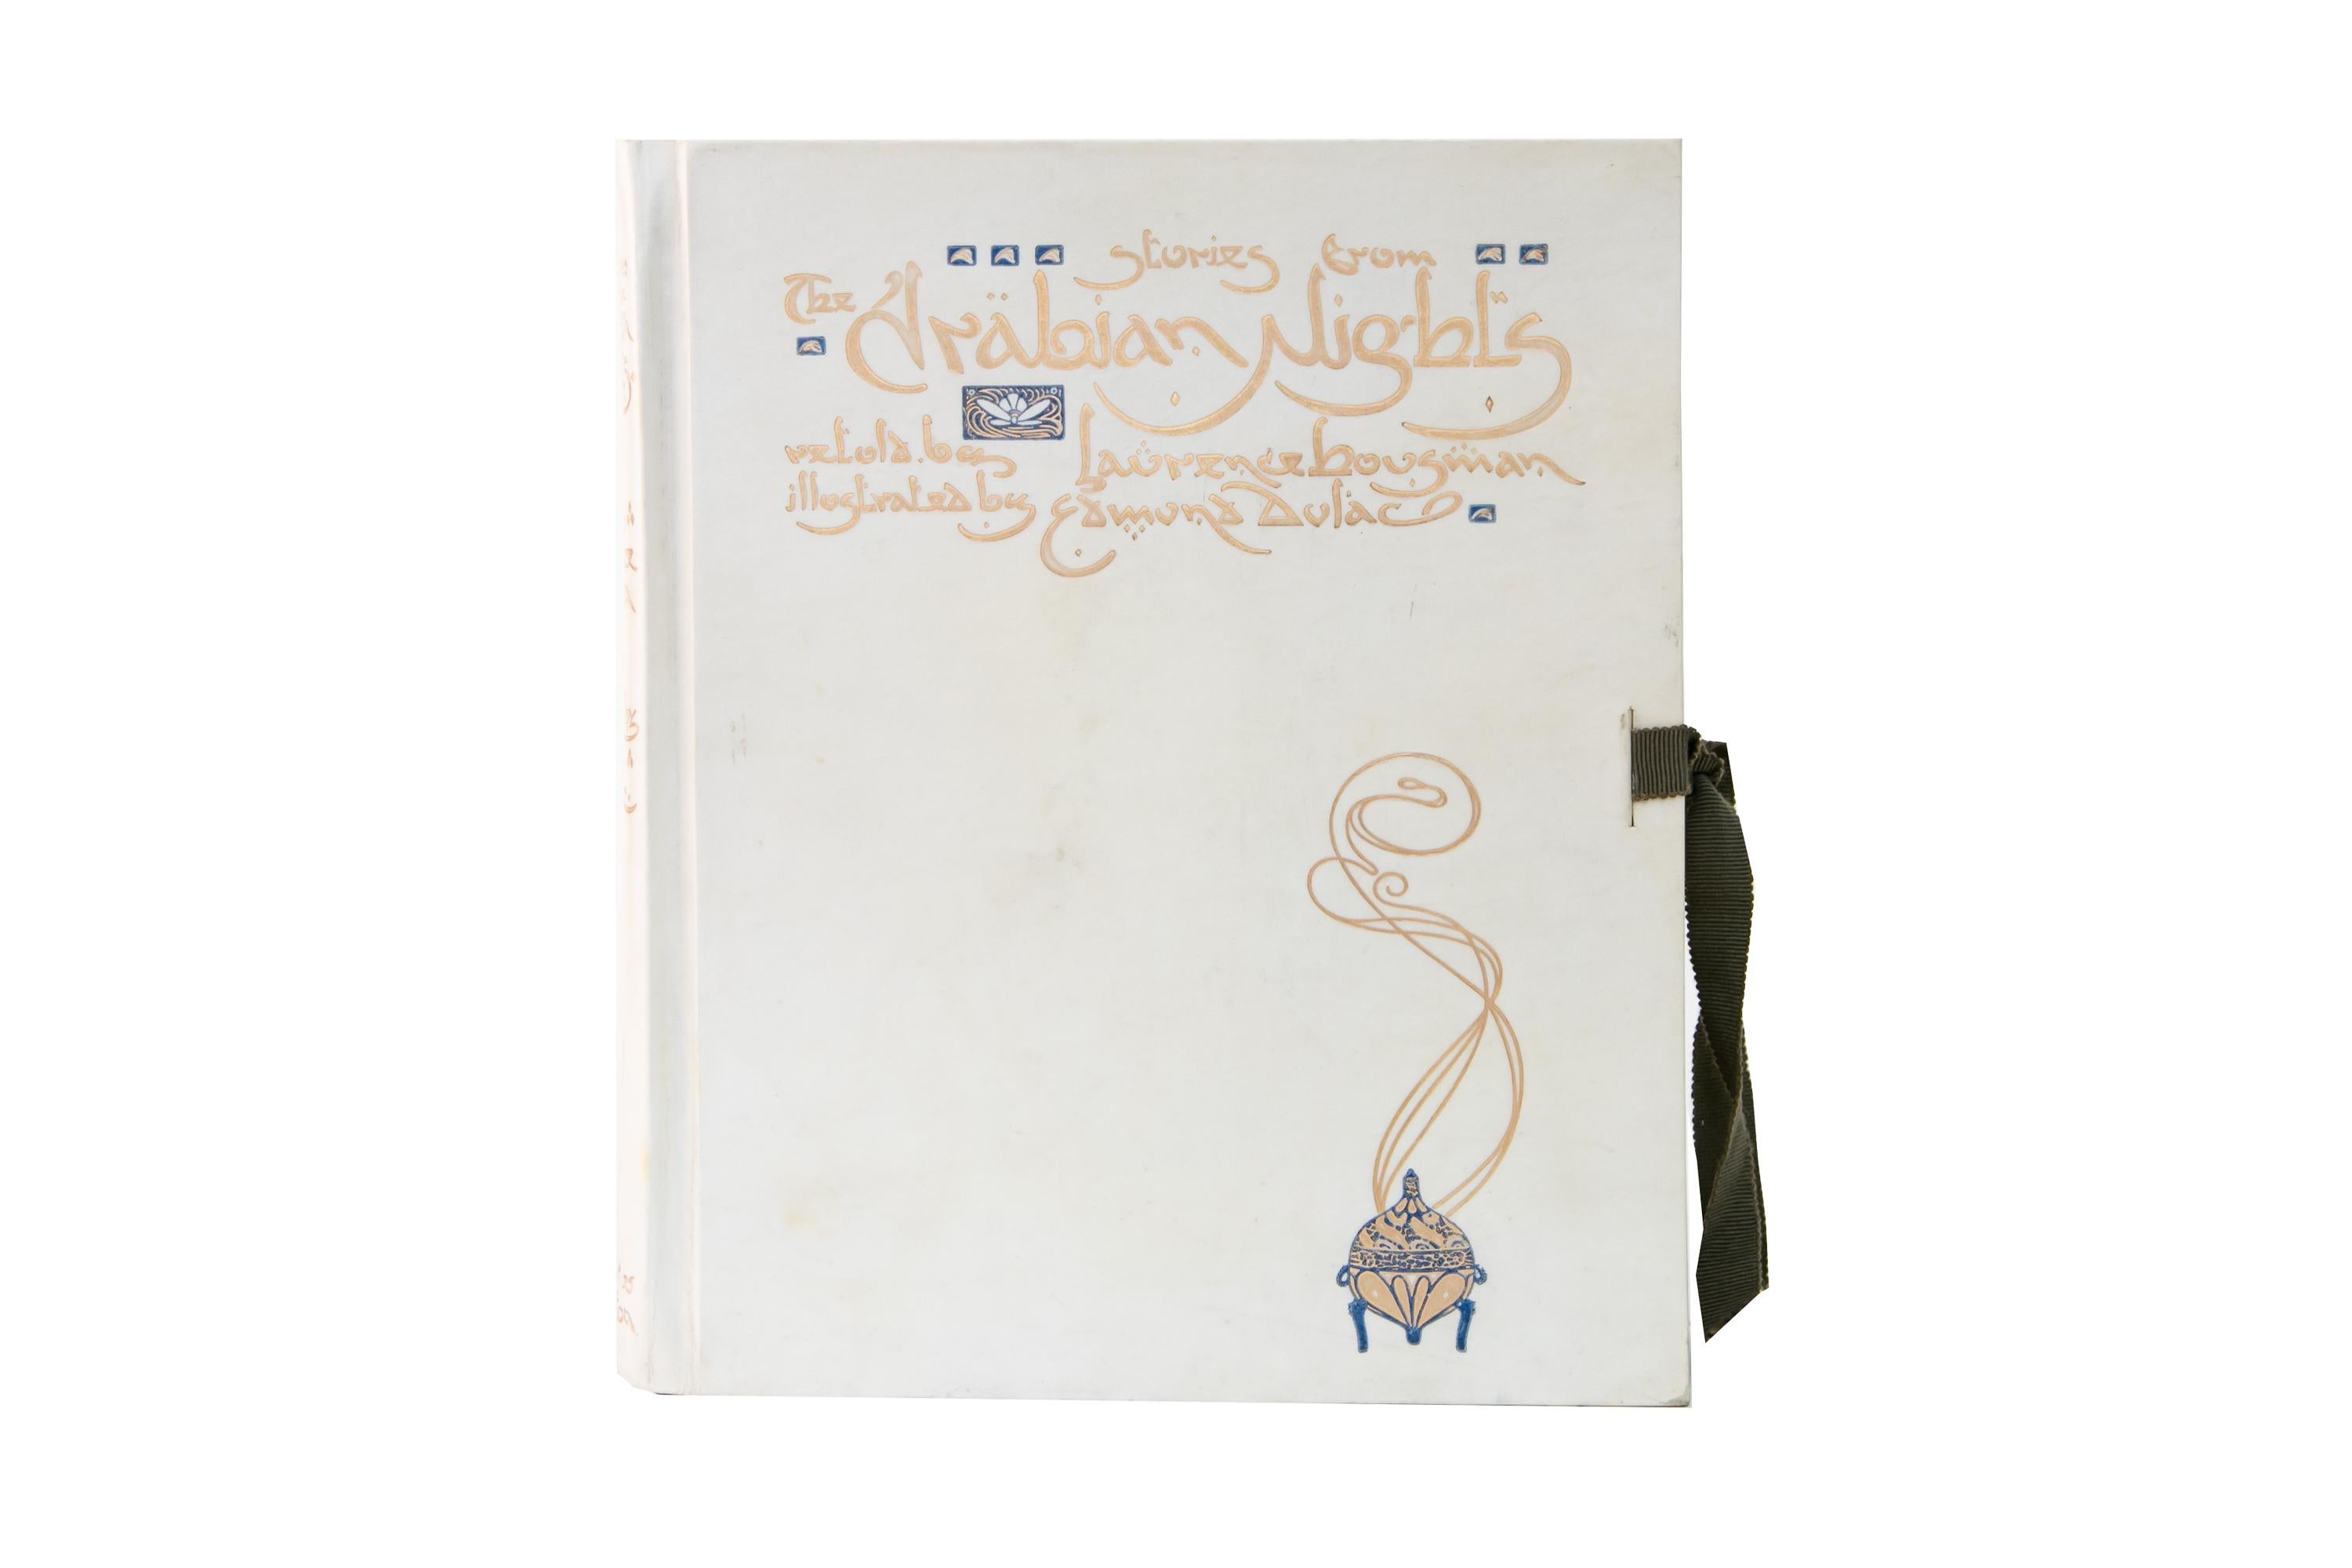 1 Volume. Laurence Housman, Arabian Nights. Limited Edition. Bound in full vellum with the covers and spines displaying gilded and blue titles and decorative details. The top edge is gilded and there is a linen tie attached to the covers. This